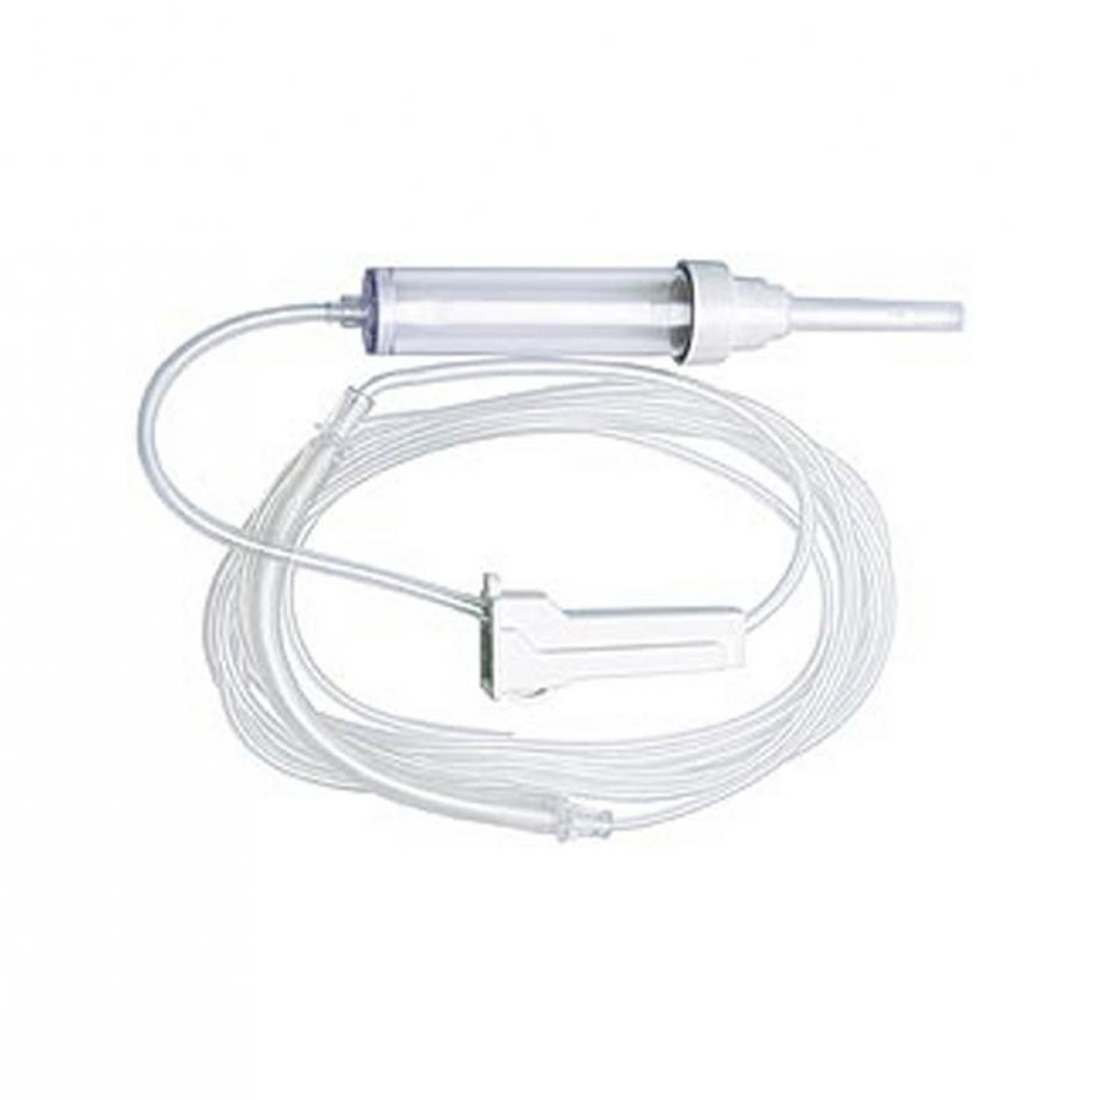 Disposable Surgical Irrigation Tubing for MD-20 3m Long - 10/Box